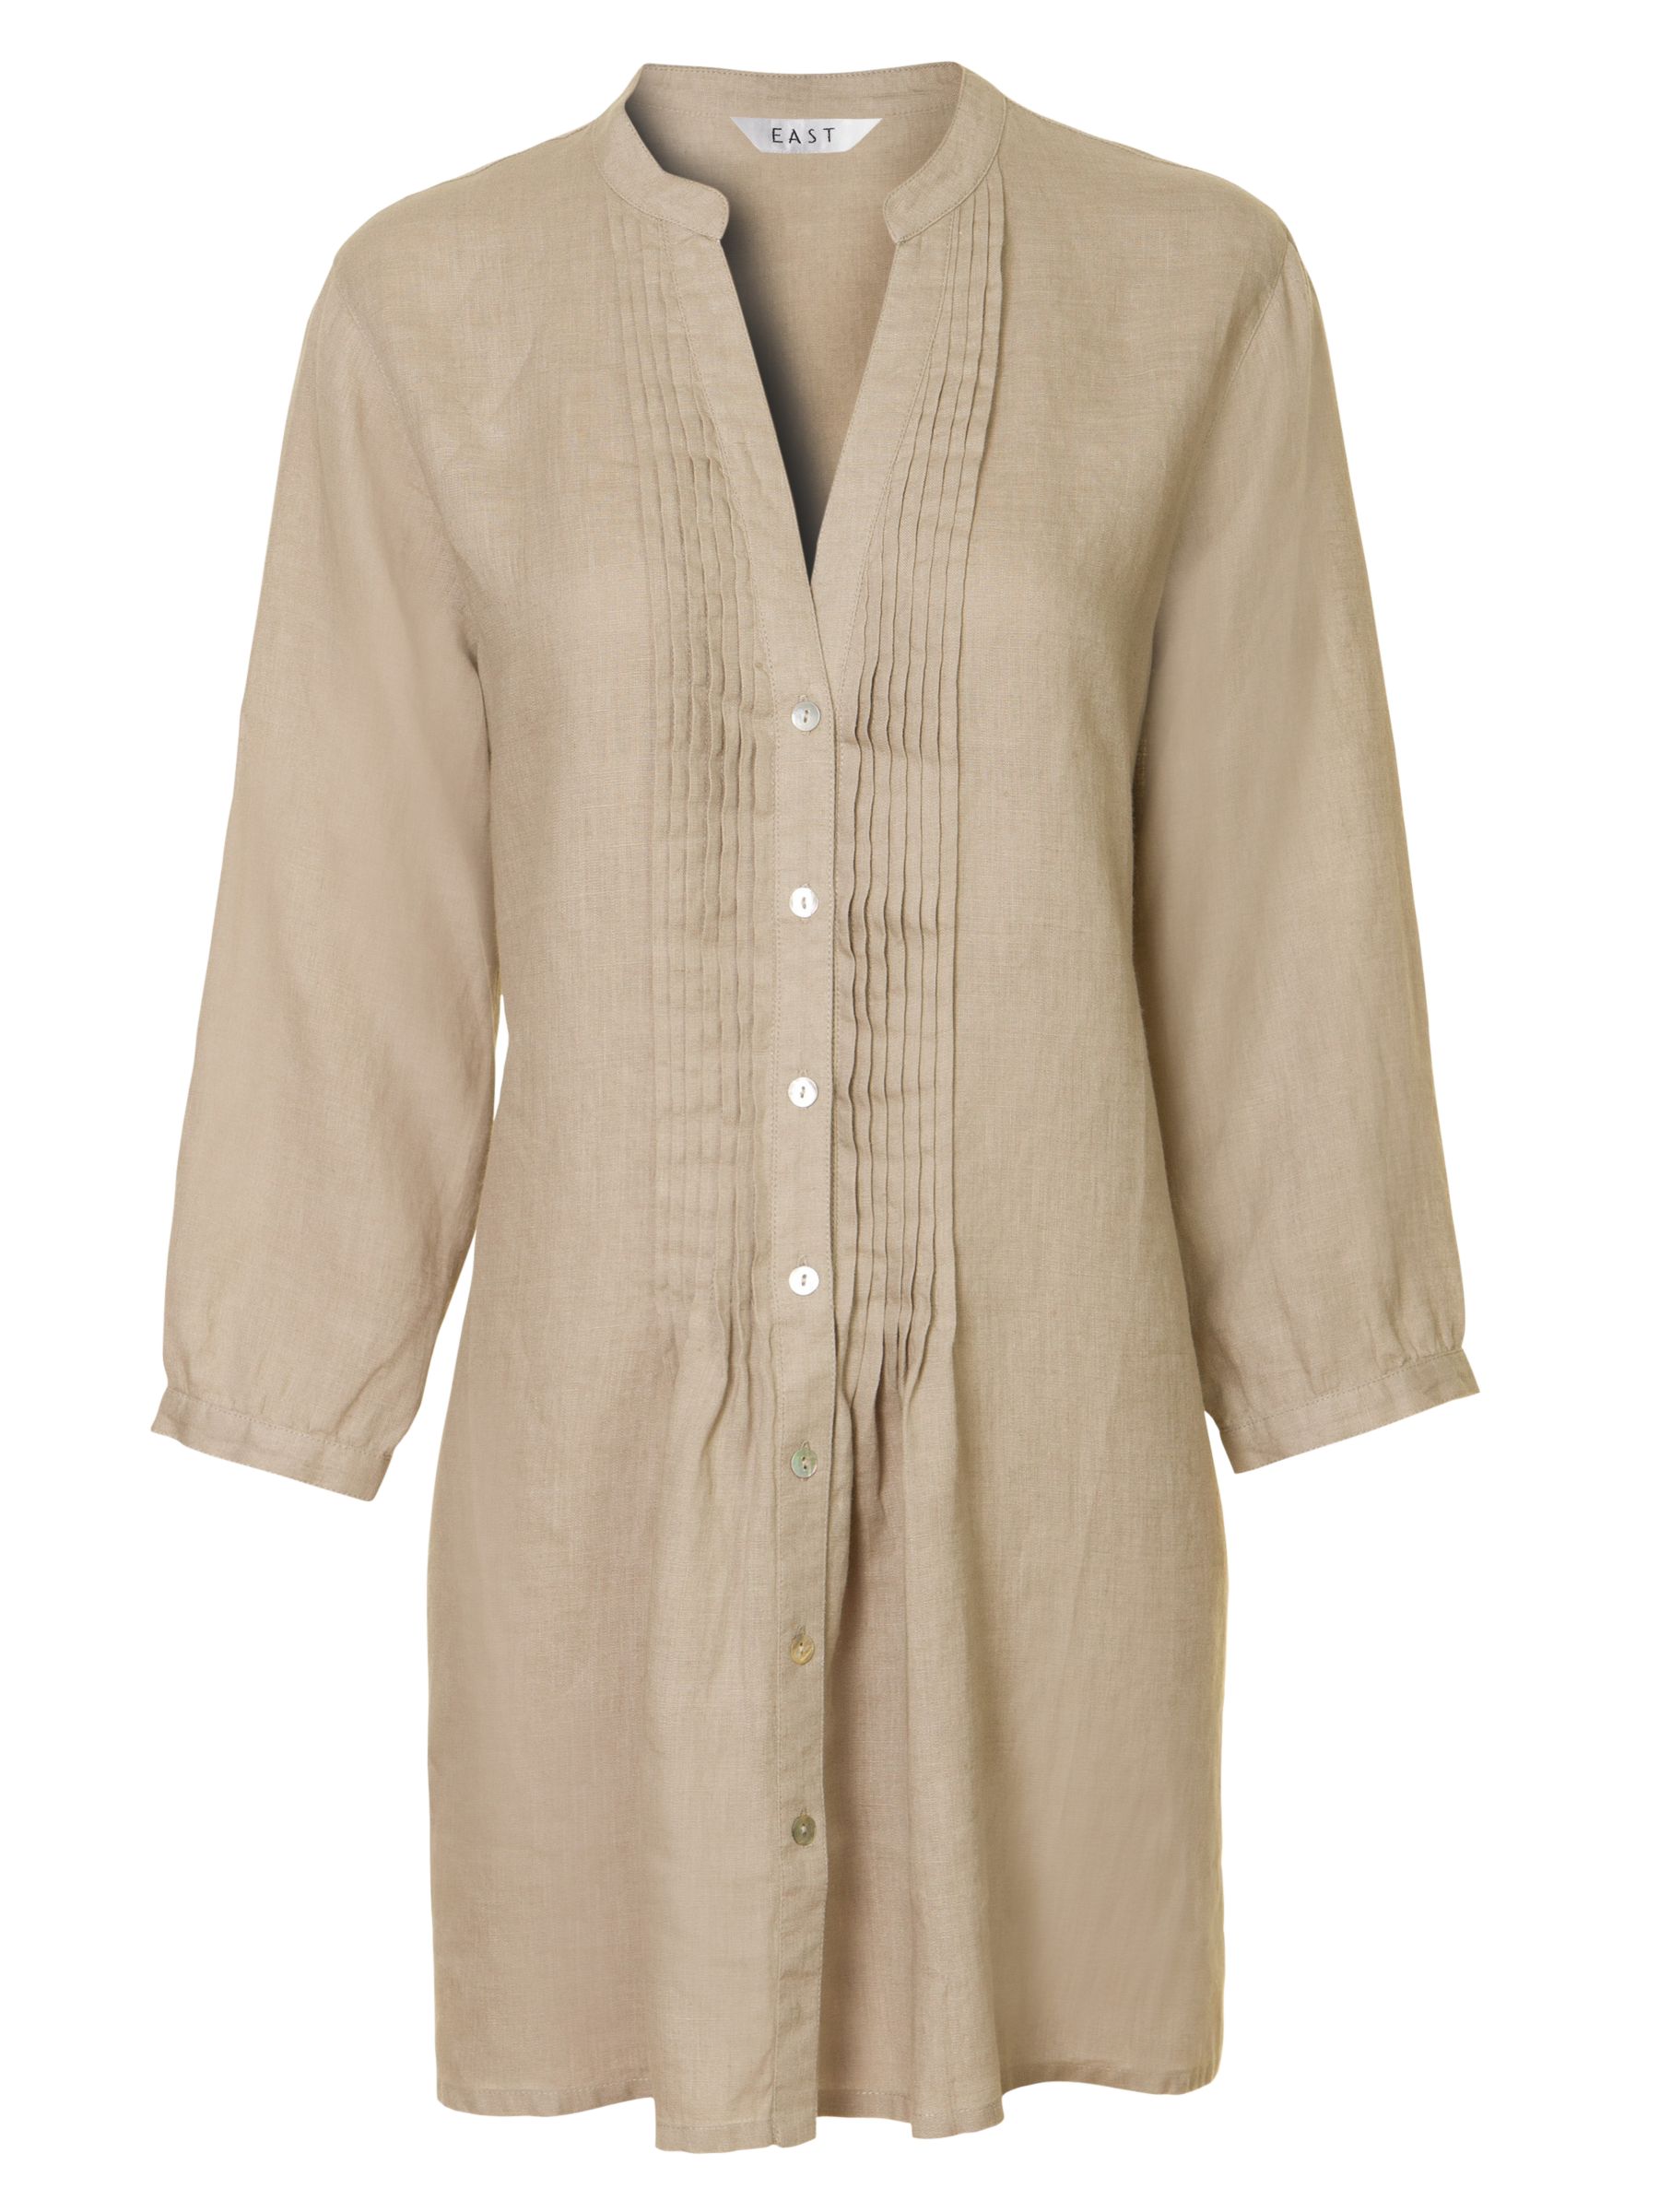 East Piazza Roma Linen Long Blouse, Sandstone